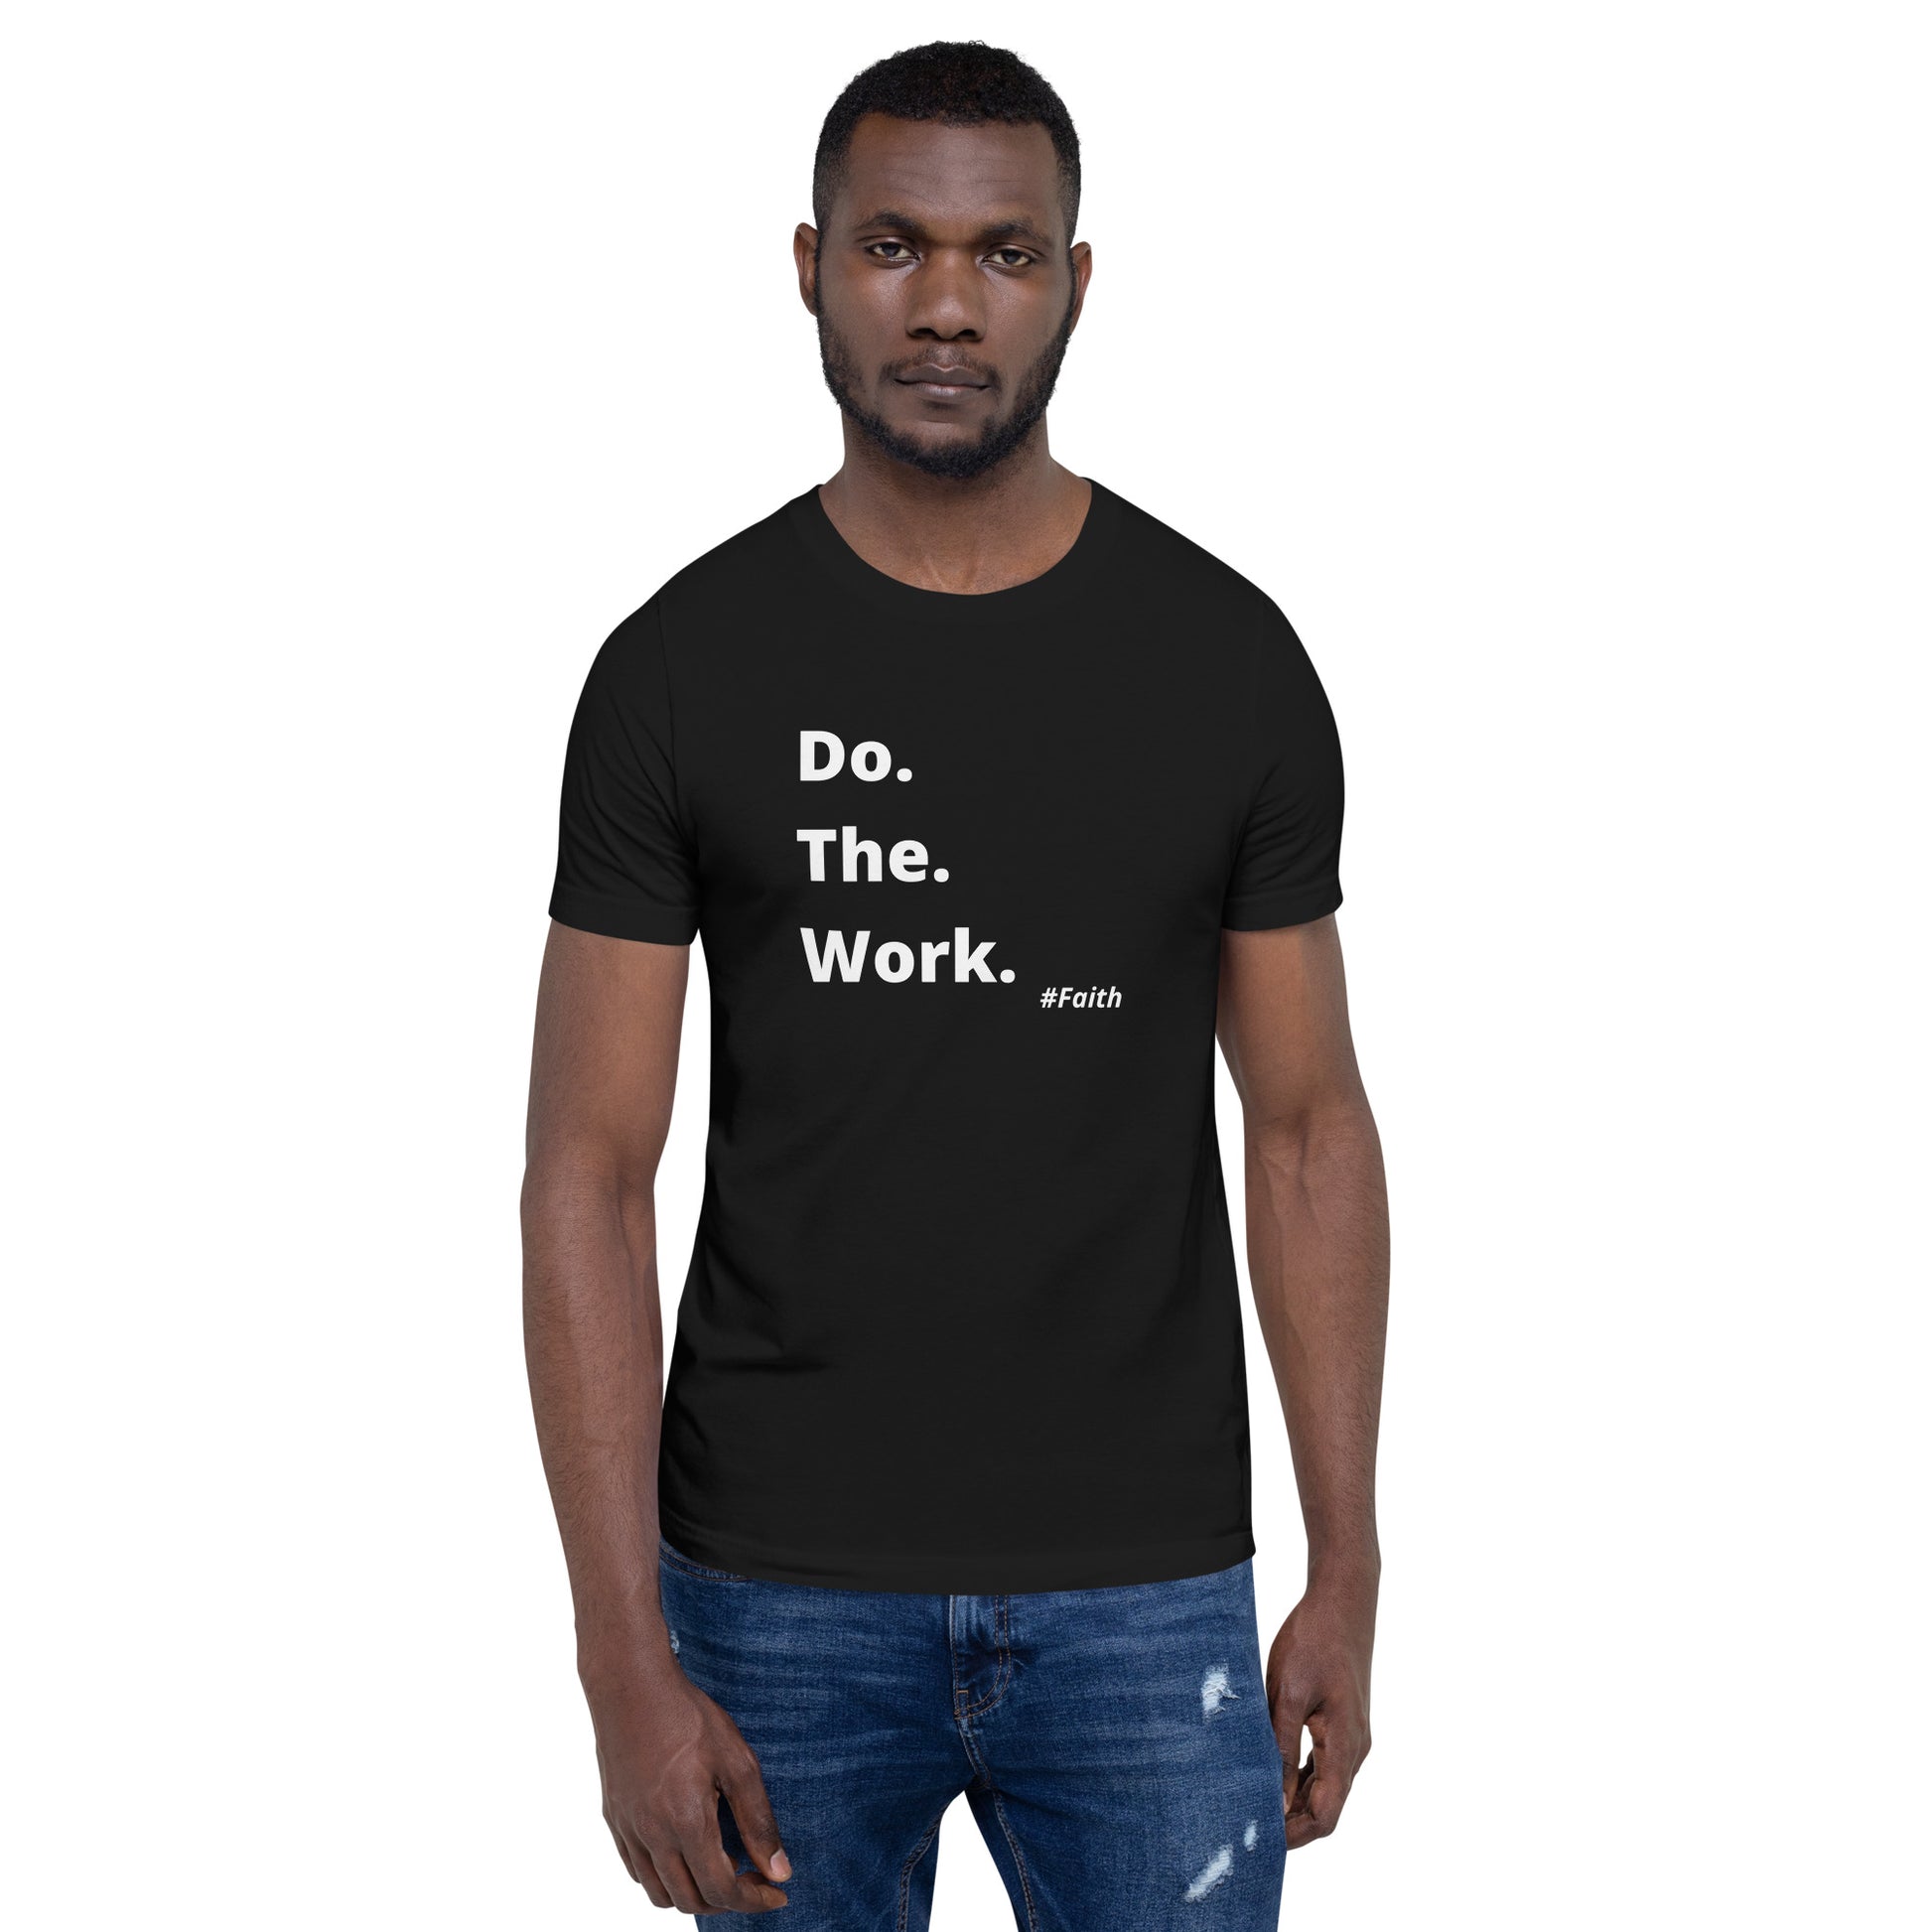 The. F.A.I.T.H. - Black T-Shirt Short-Sleeve Connection Unisex Do. Work. –